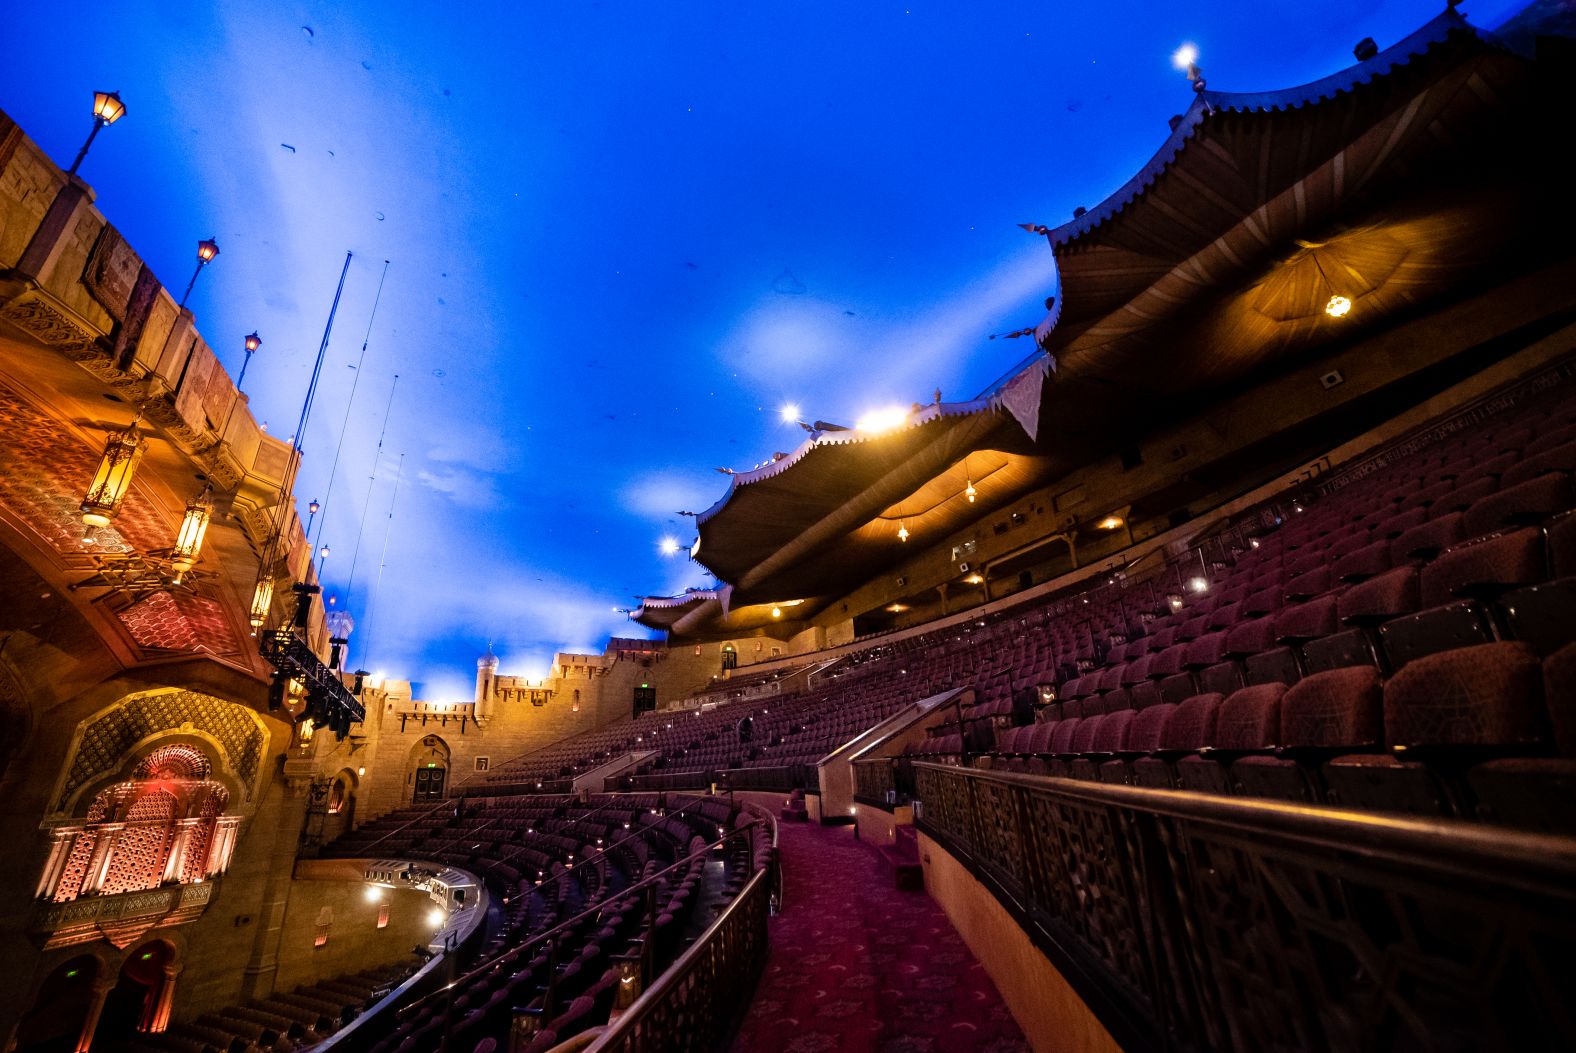 According to Billboard Magazine, in 2019 it was the 2nd highest grossing theatre worldwide for venues under 5,000 seats, second only to Caesars Palace in Las Vegas who relies on longer-term residencies. Each year, the theatre throws around 250 shows, and welcomes roughly half a million visitors through its doors to take in an eclectic variety of Broadway shows and concerts.   <br /><br />In the last decade, the 4,665 person capacity room has sold more tickets than any other venue in its size bracket globally, according to VenuesNow. Between November 2009 and November 2019, they hosted 1,864 shows, sold 5,354,196 tickets, and grossed $331,867,429. 